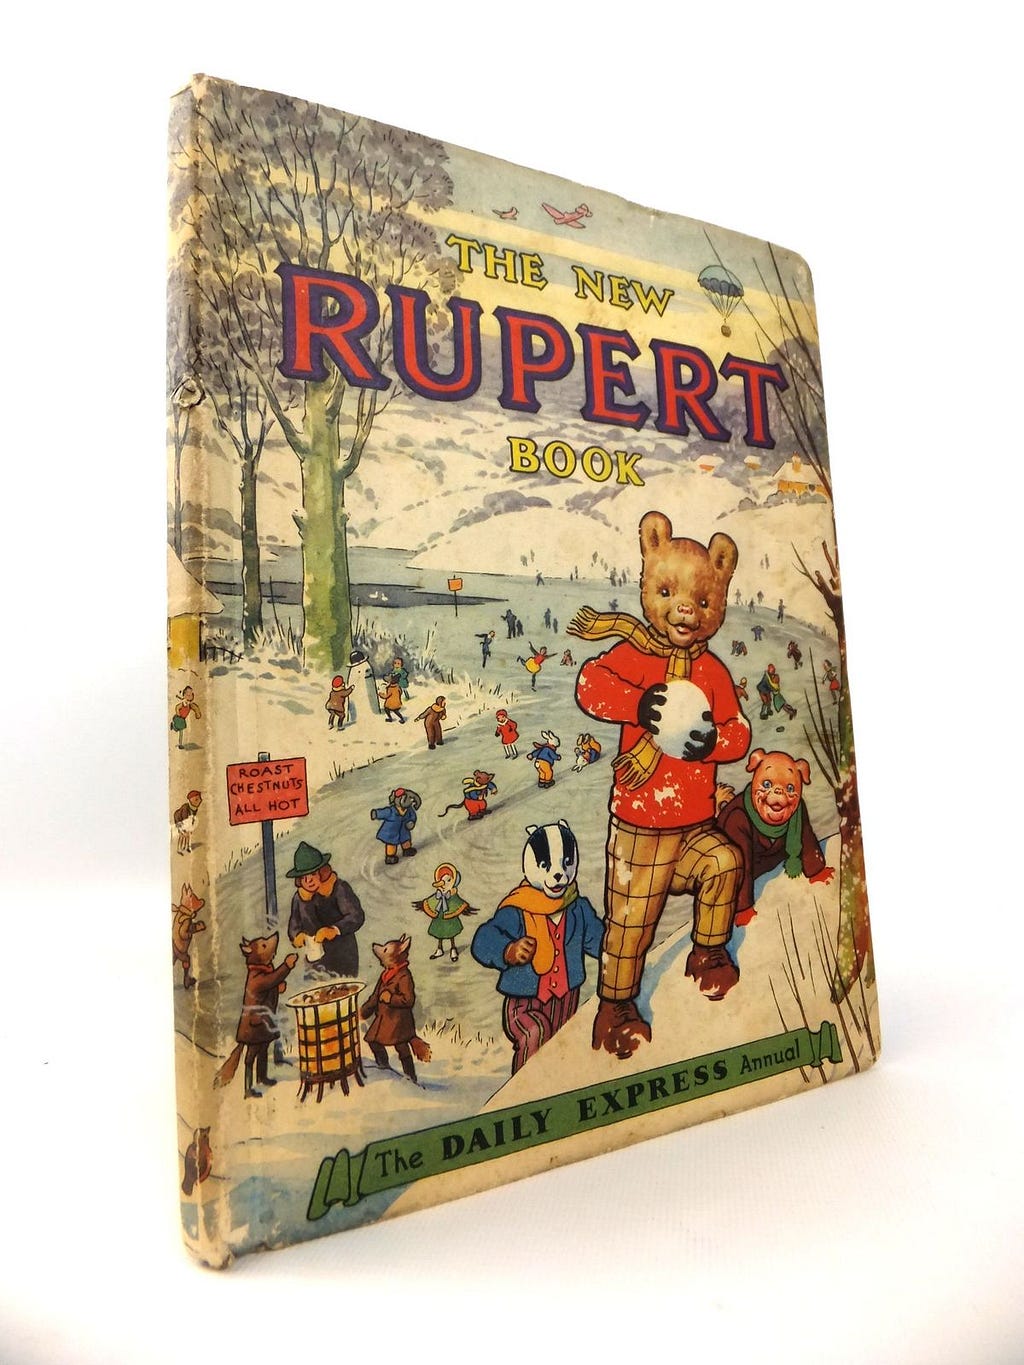 A picture of the 1951 Rupert annual, titled “The New Rupert Book”.